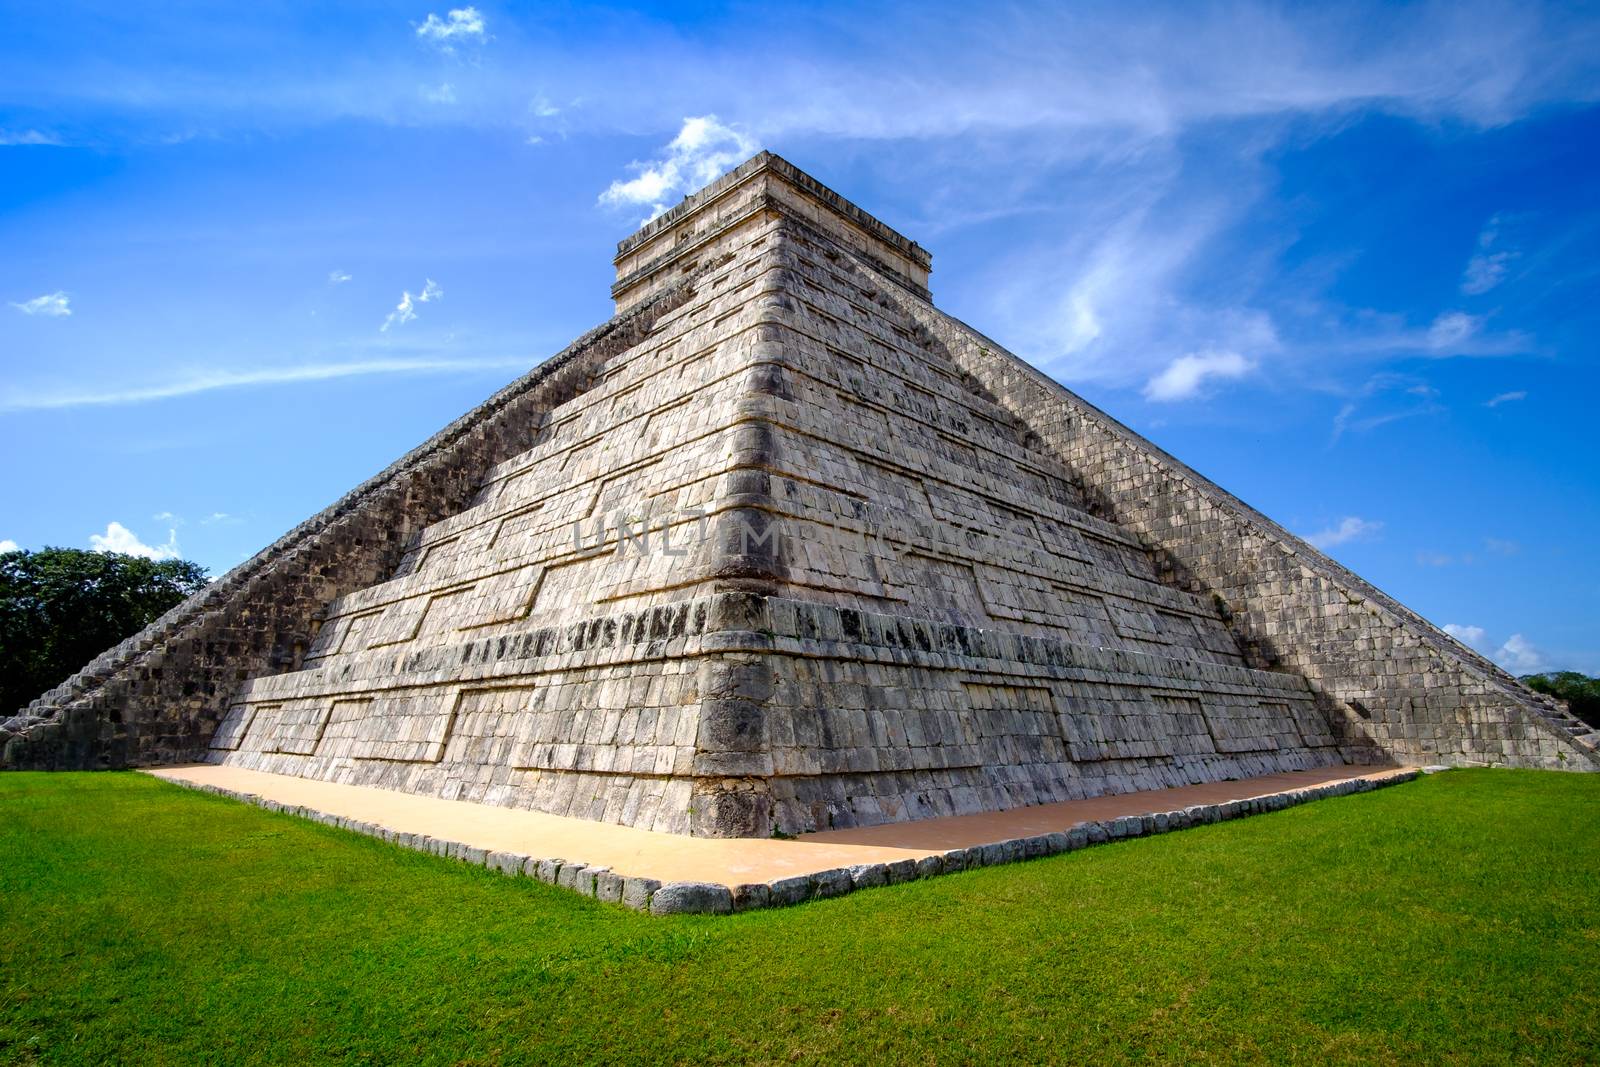 Detail view of famous Mayan pyramid in Chichen Itza by martinm303